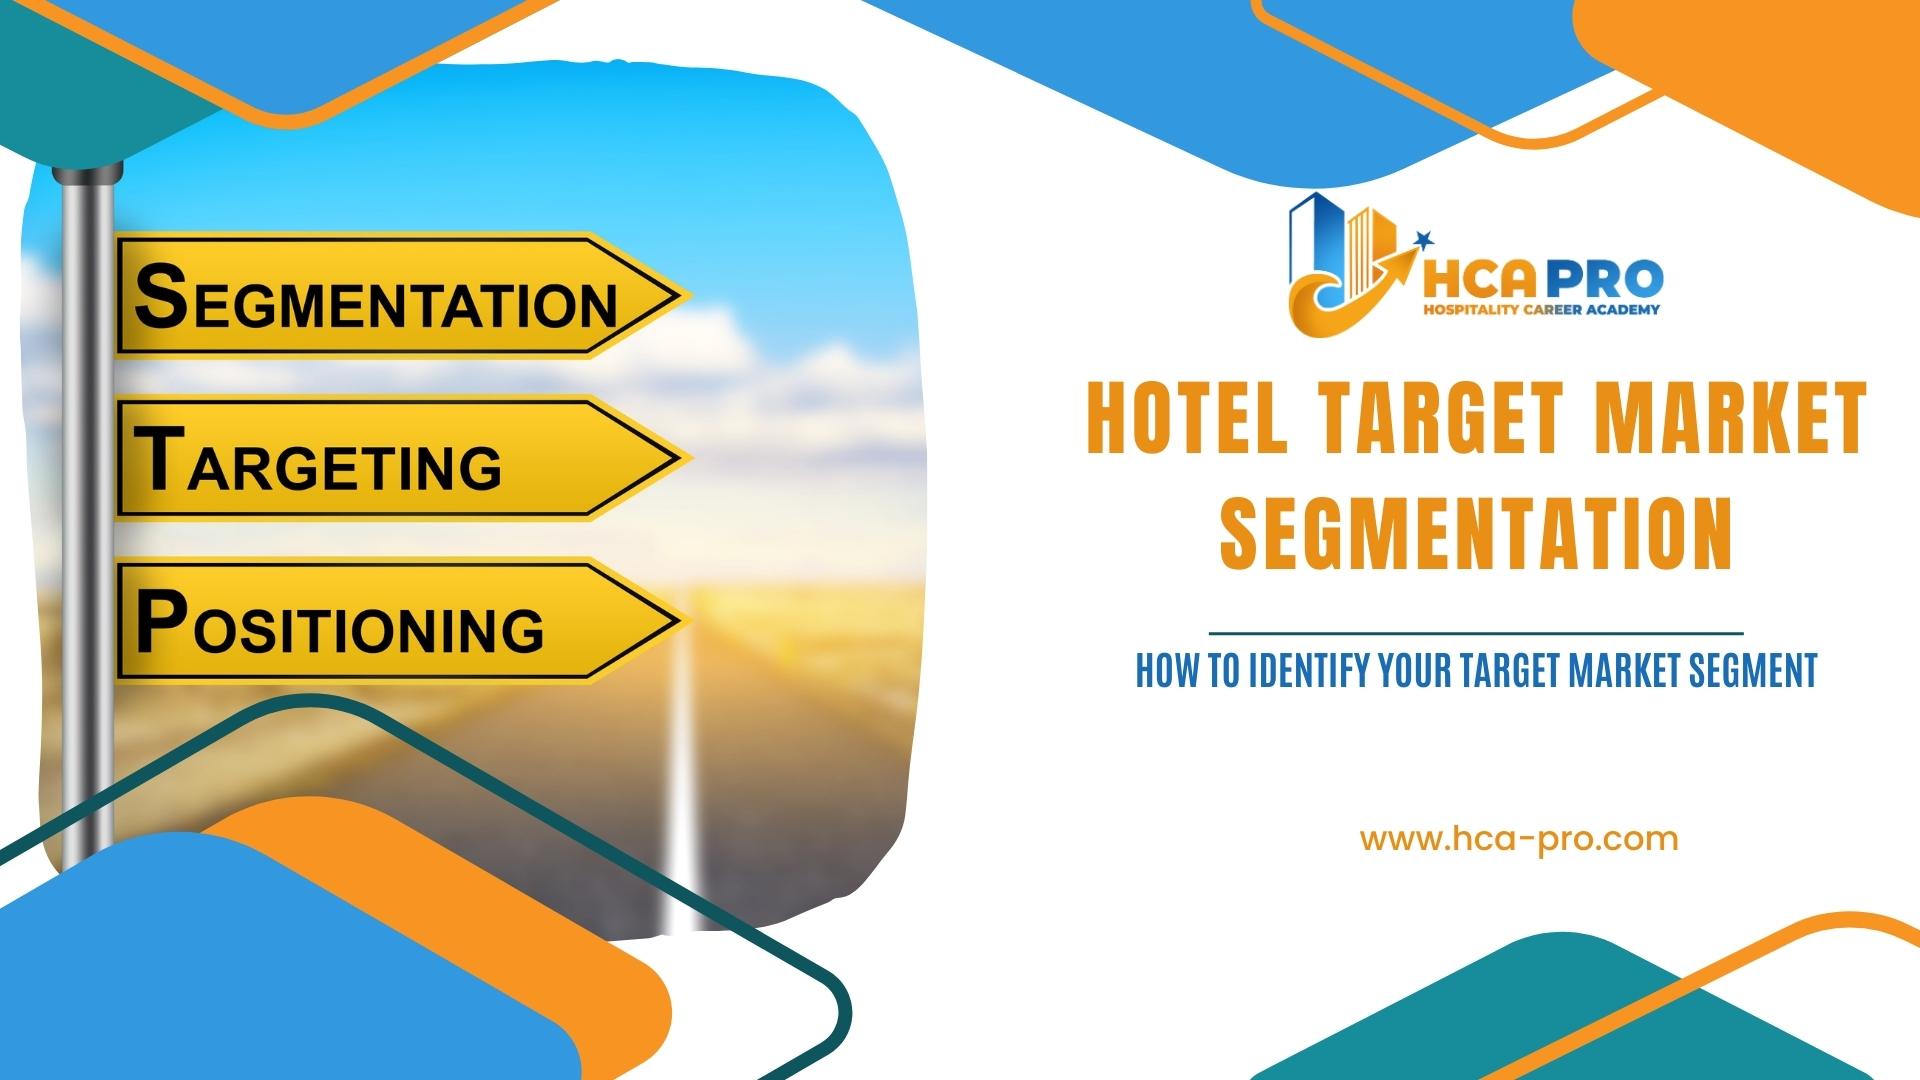 A hotel's target market refers to the specific group of consumers that the hotel is trying to reach and appeal to. Identifying the target market is an important aspect of marketing for hotels, as it allows them to tailor their marketing efforts and produc